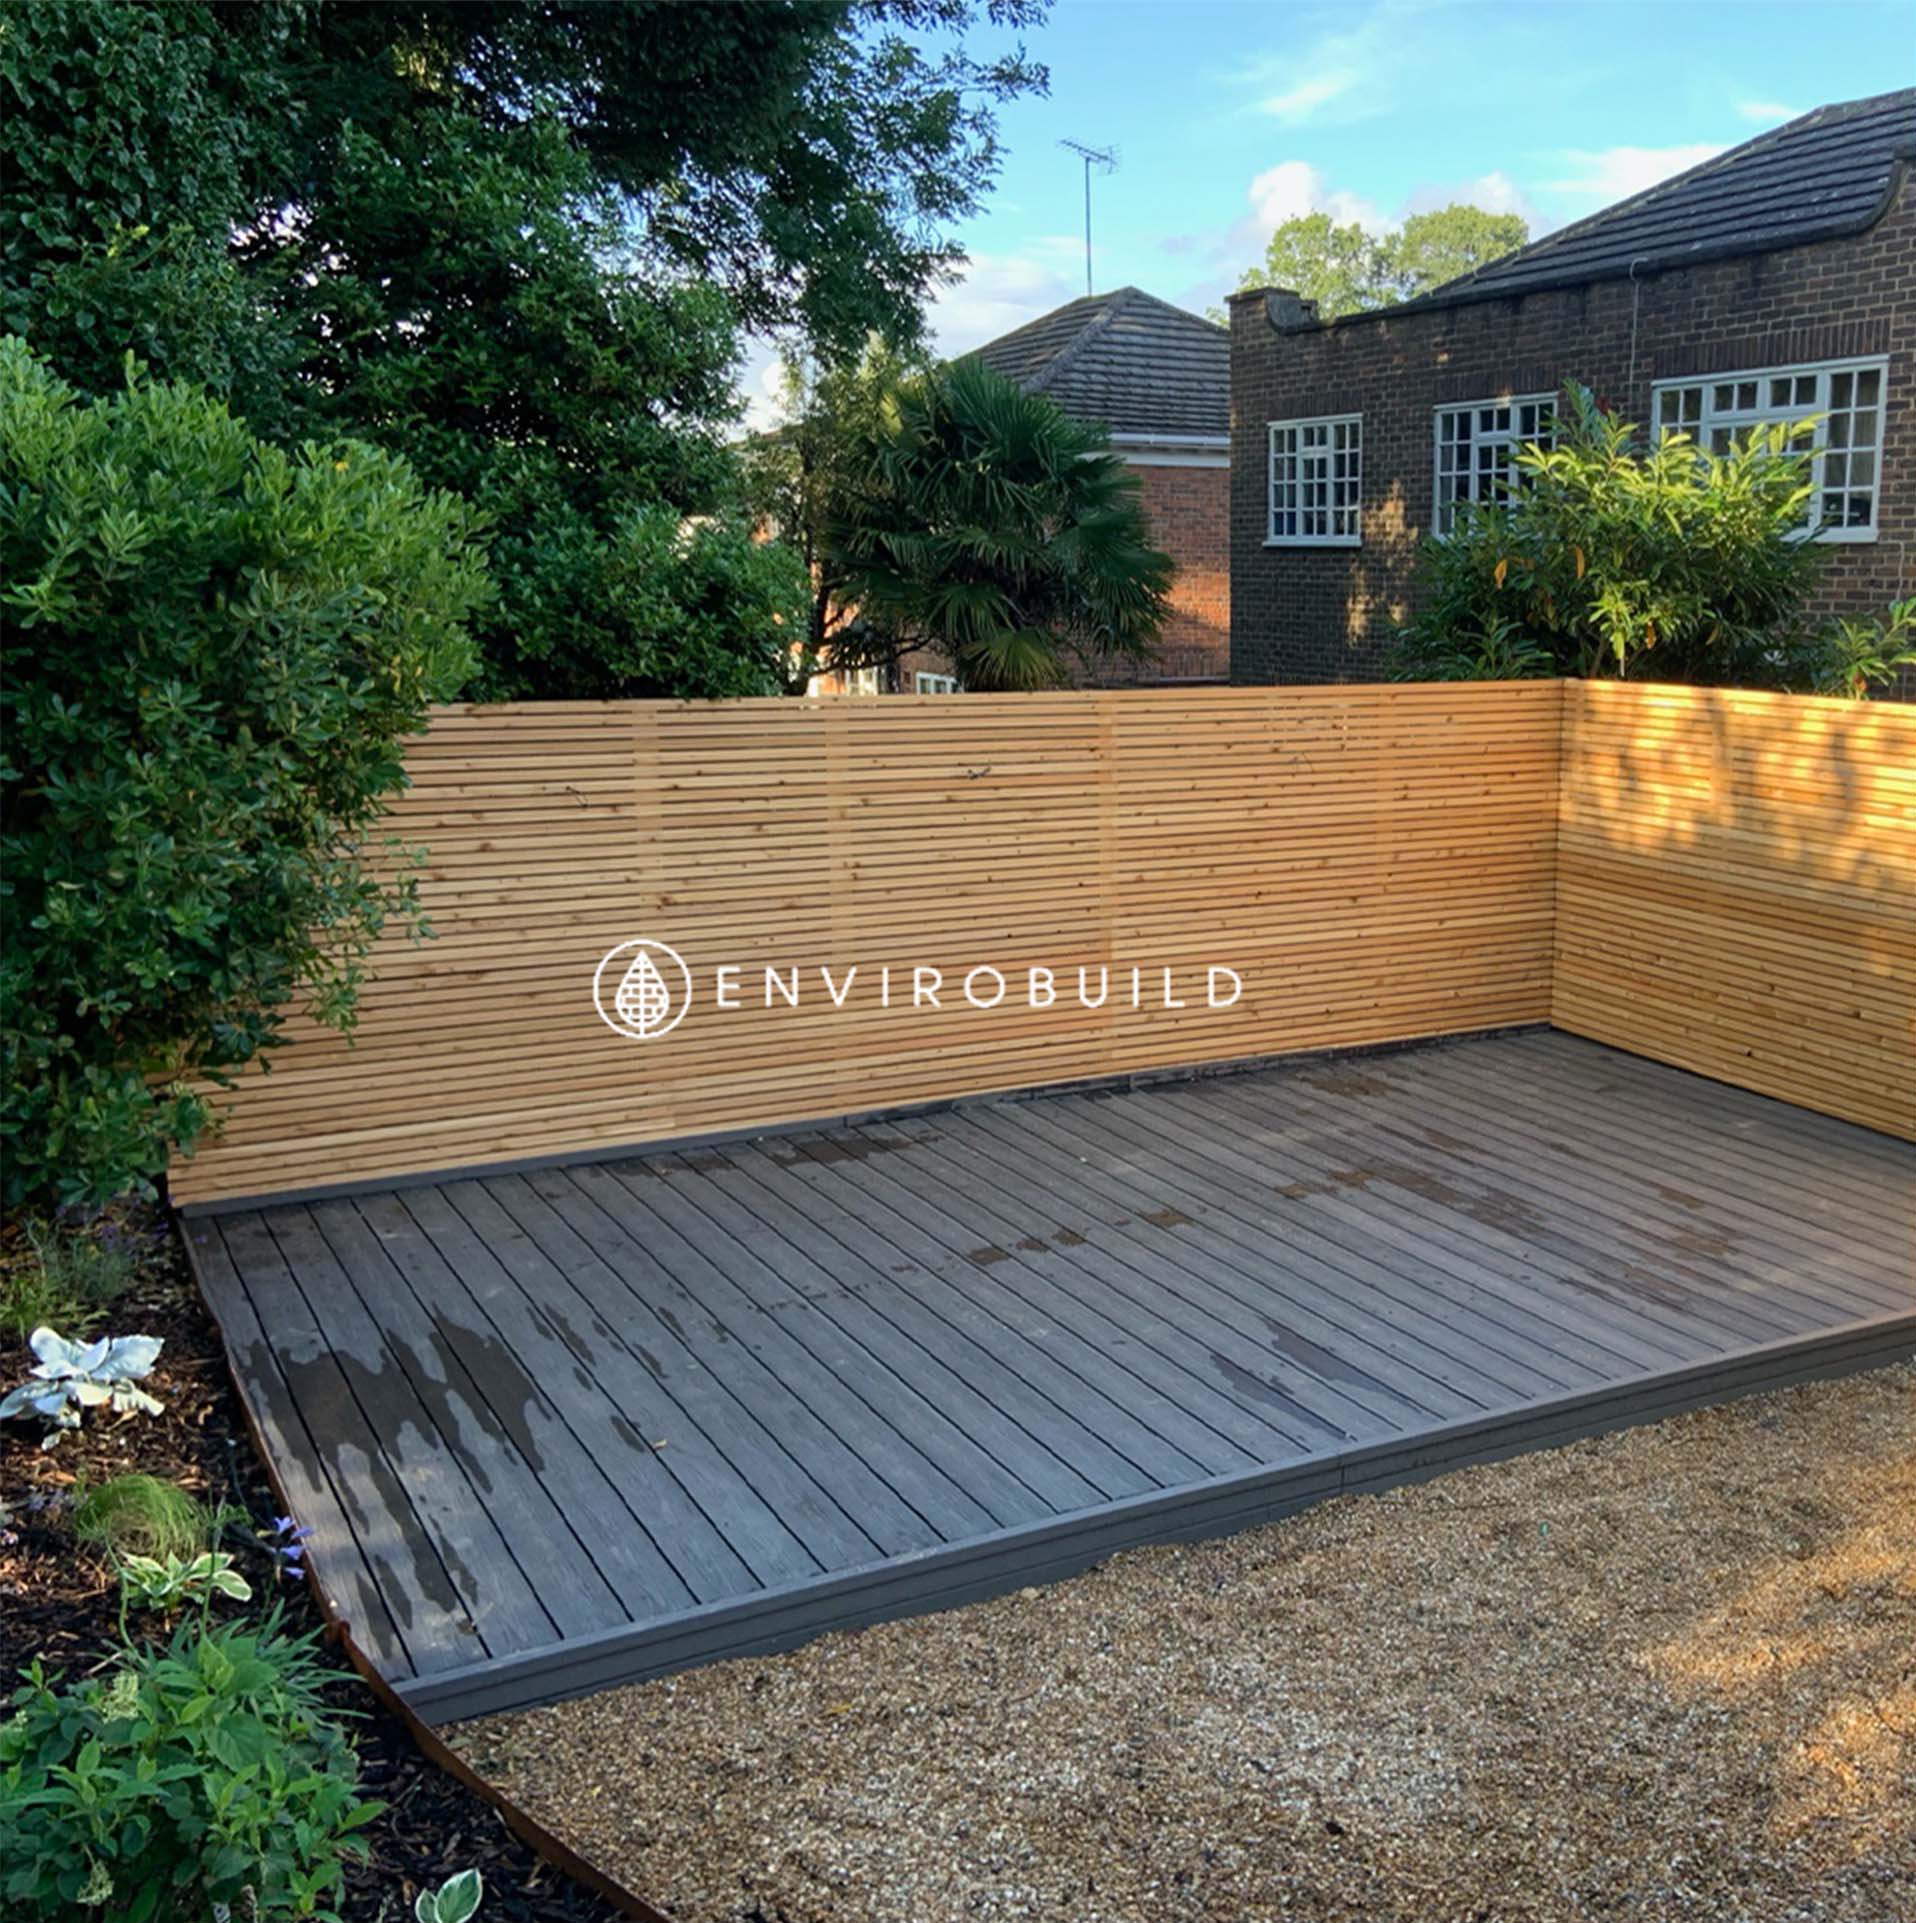 Some Sustainable Composite Decking with the Envirobuild Logo on top